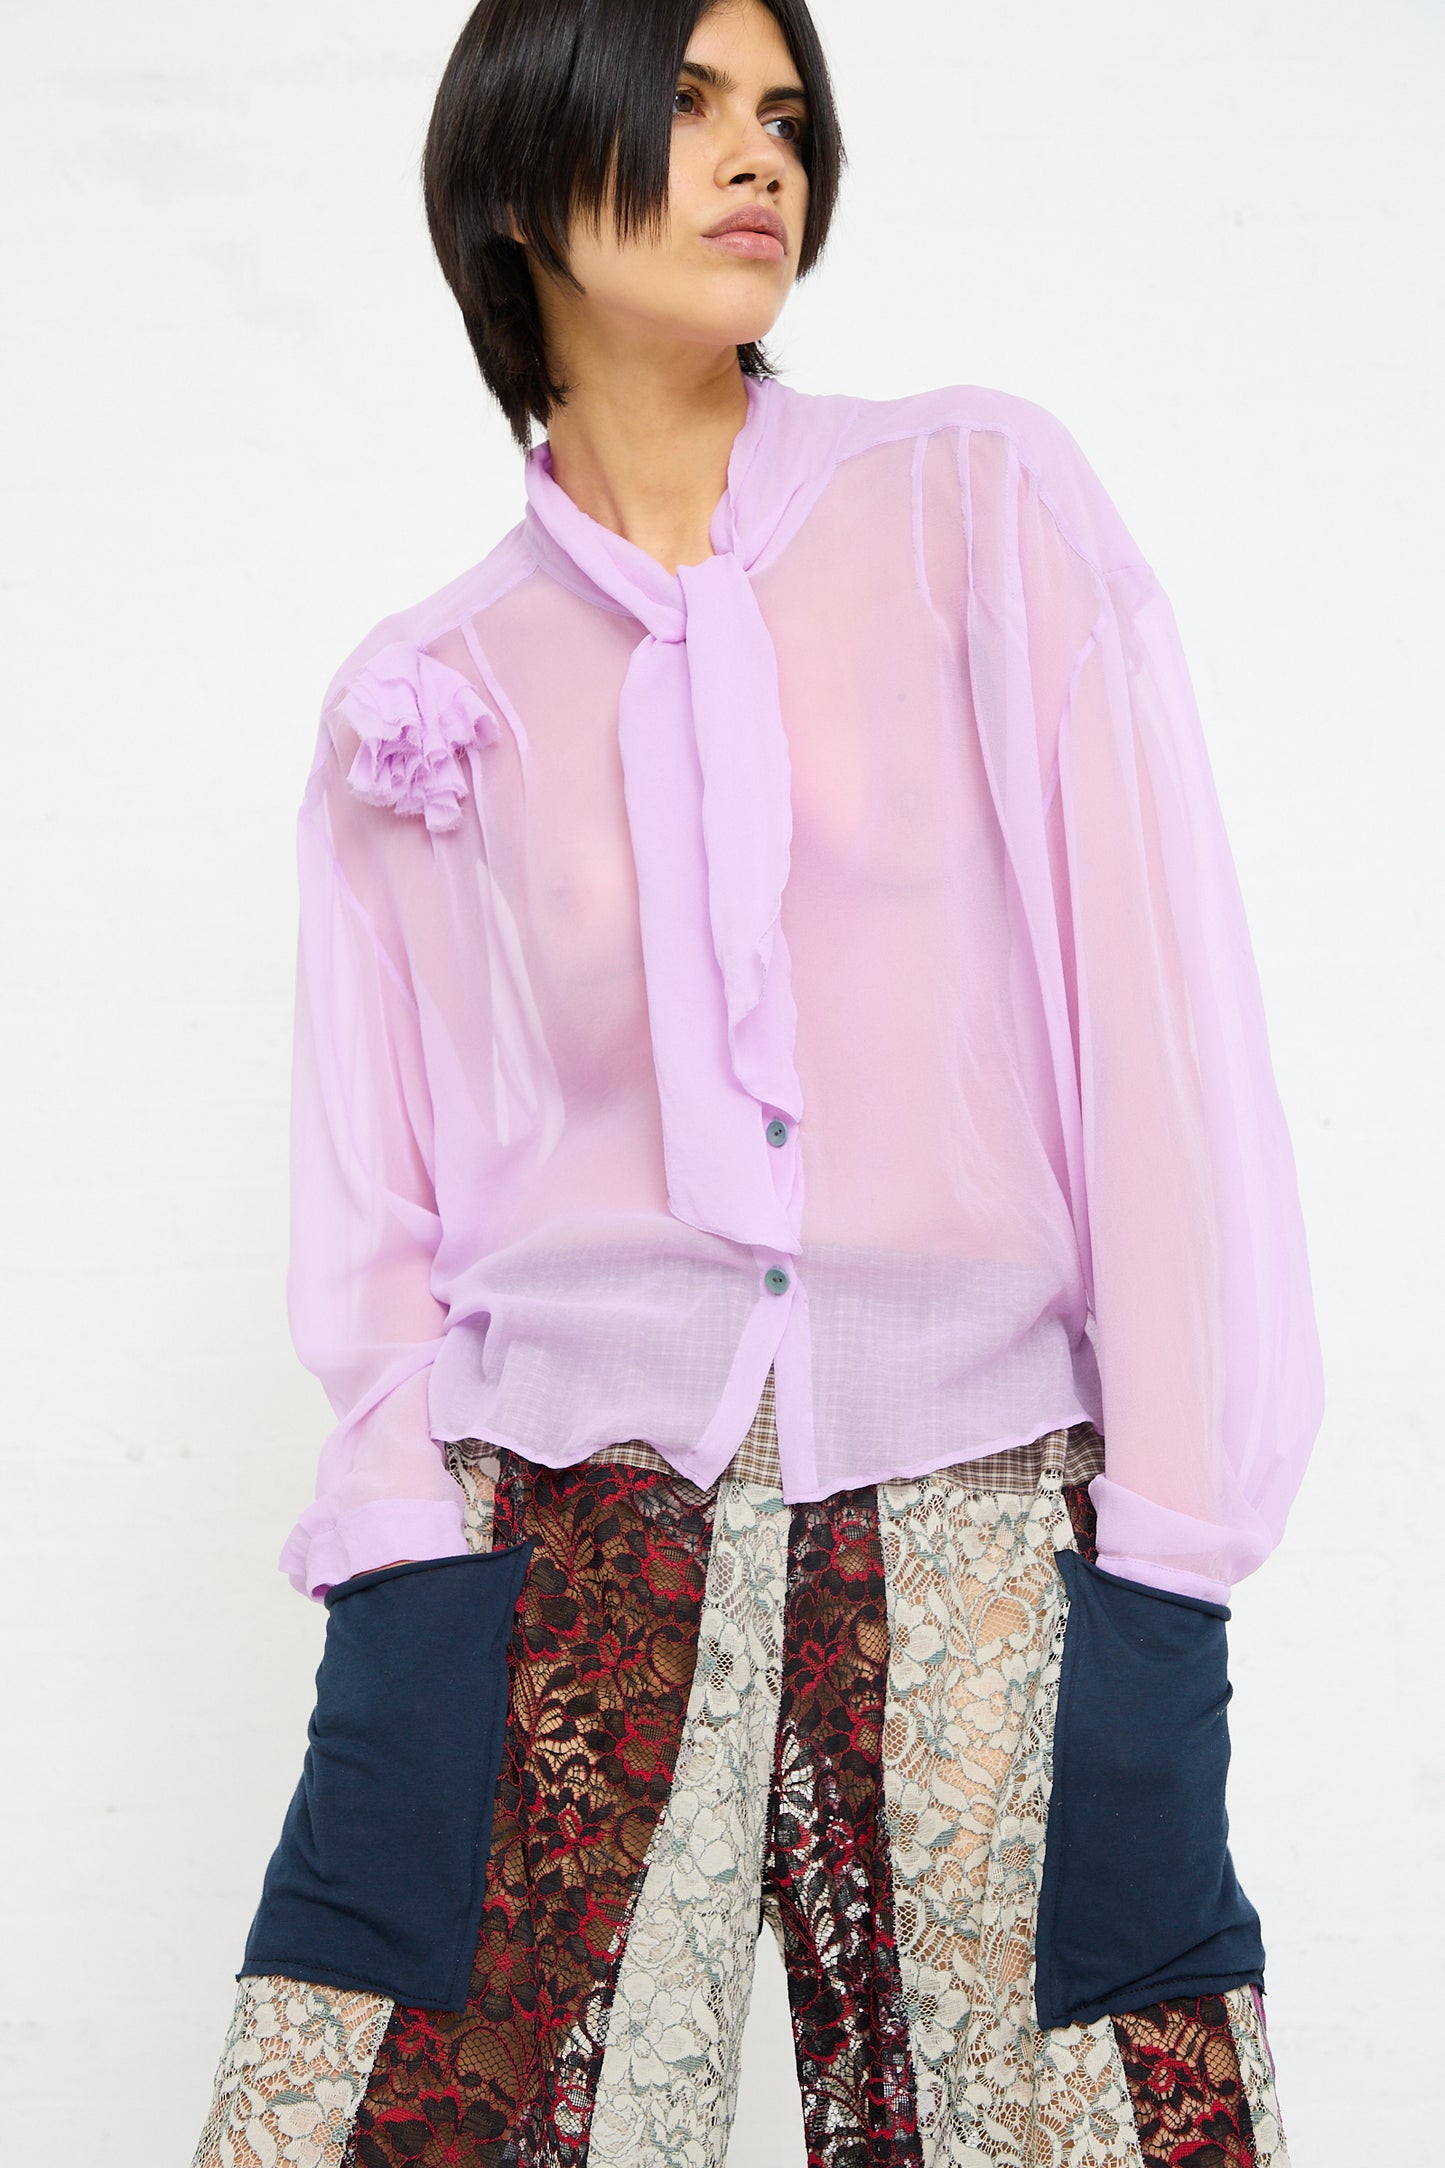 A person stands against a white background, wearing a SC103 Silk Chiffon Mandolin Blouse in Sash with rosette detail and patterned trousers.